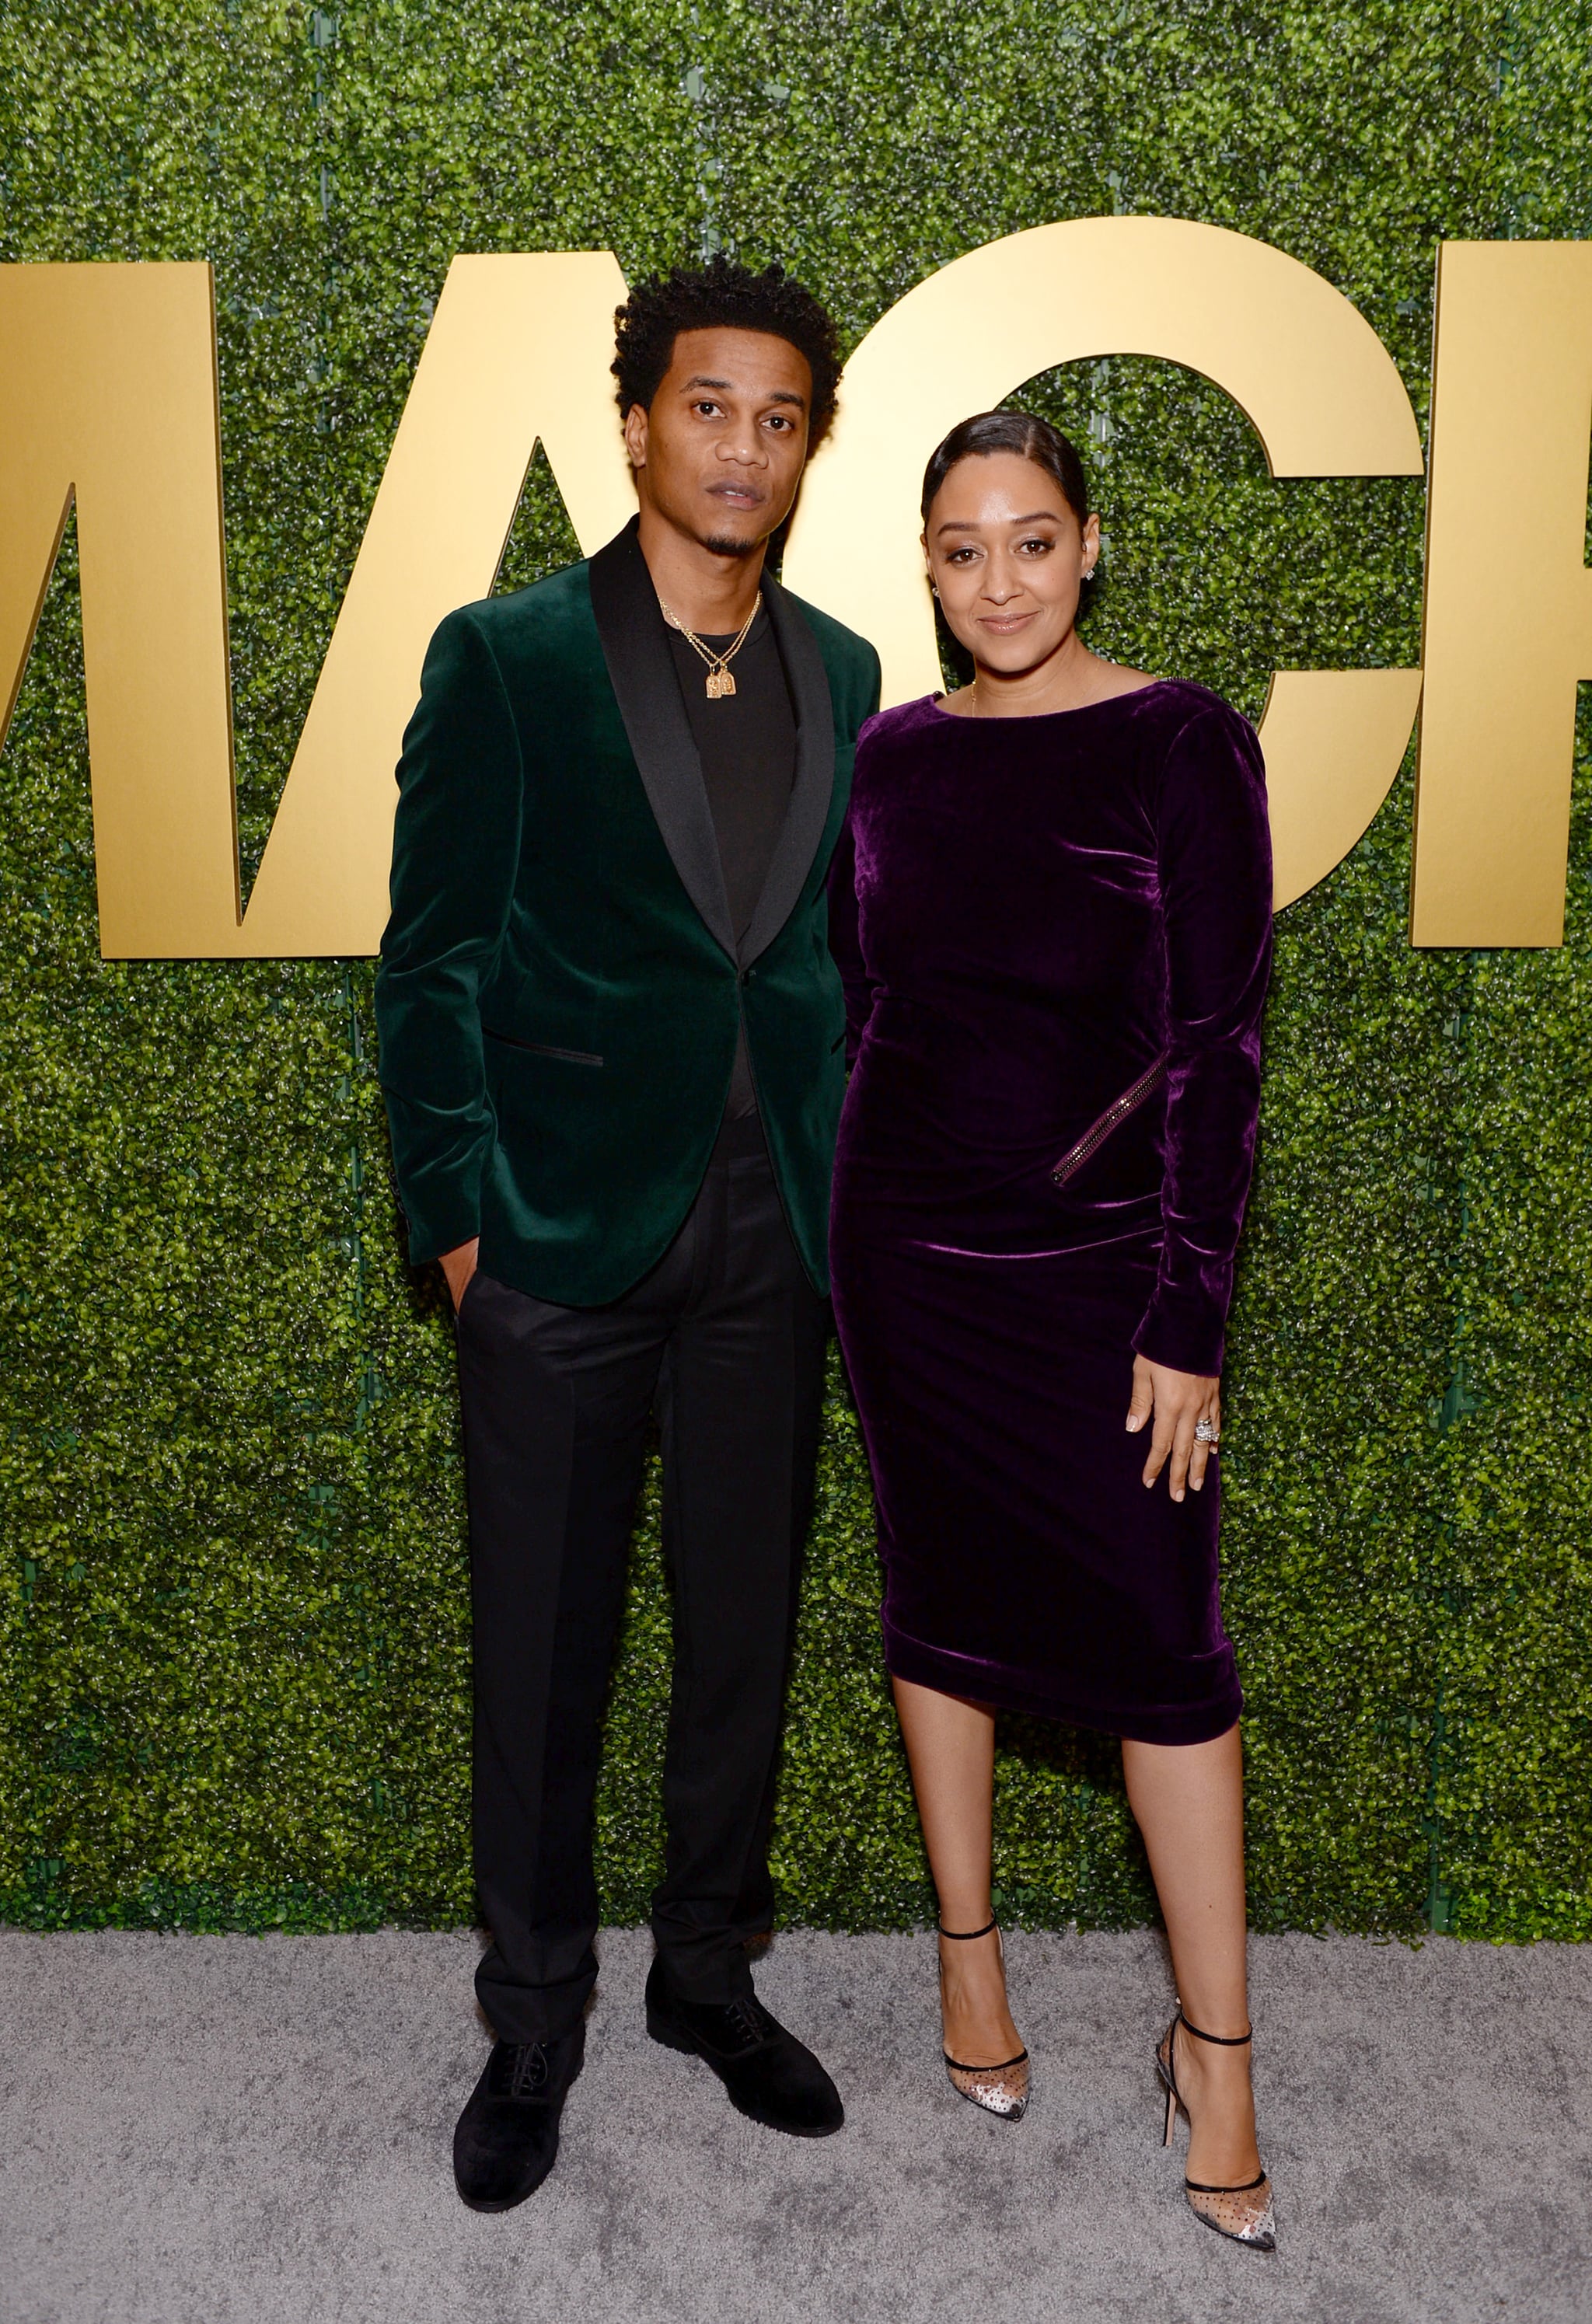 WEST HOLLYWOOD, CALIFORNIA - FEBRUARY 06: (L-R) Cory Hardrict and Tia Mowry attend the 3rd Annual MACRO Pre-Oscar Party on February 06, 2020 in West Hollywood, California. (Photo by Andrew Toth/Getty Images for MACRO)